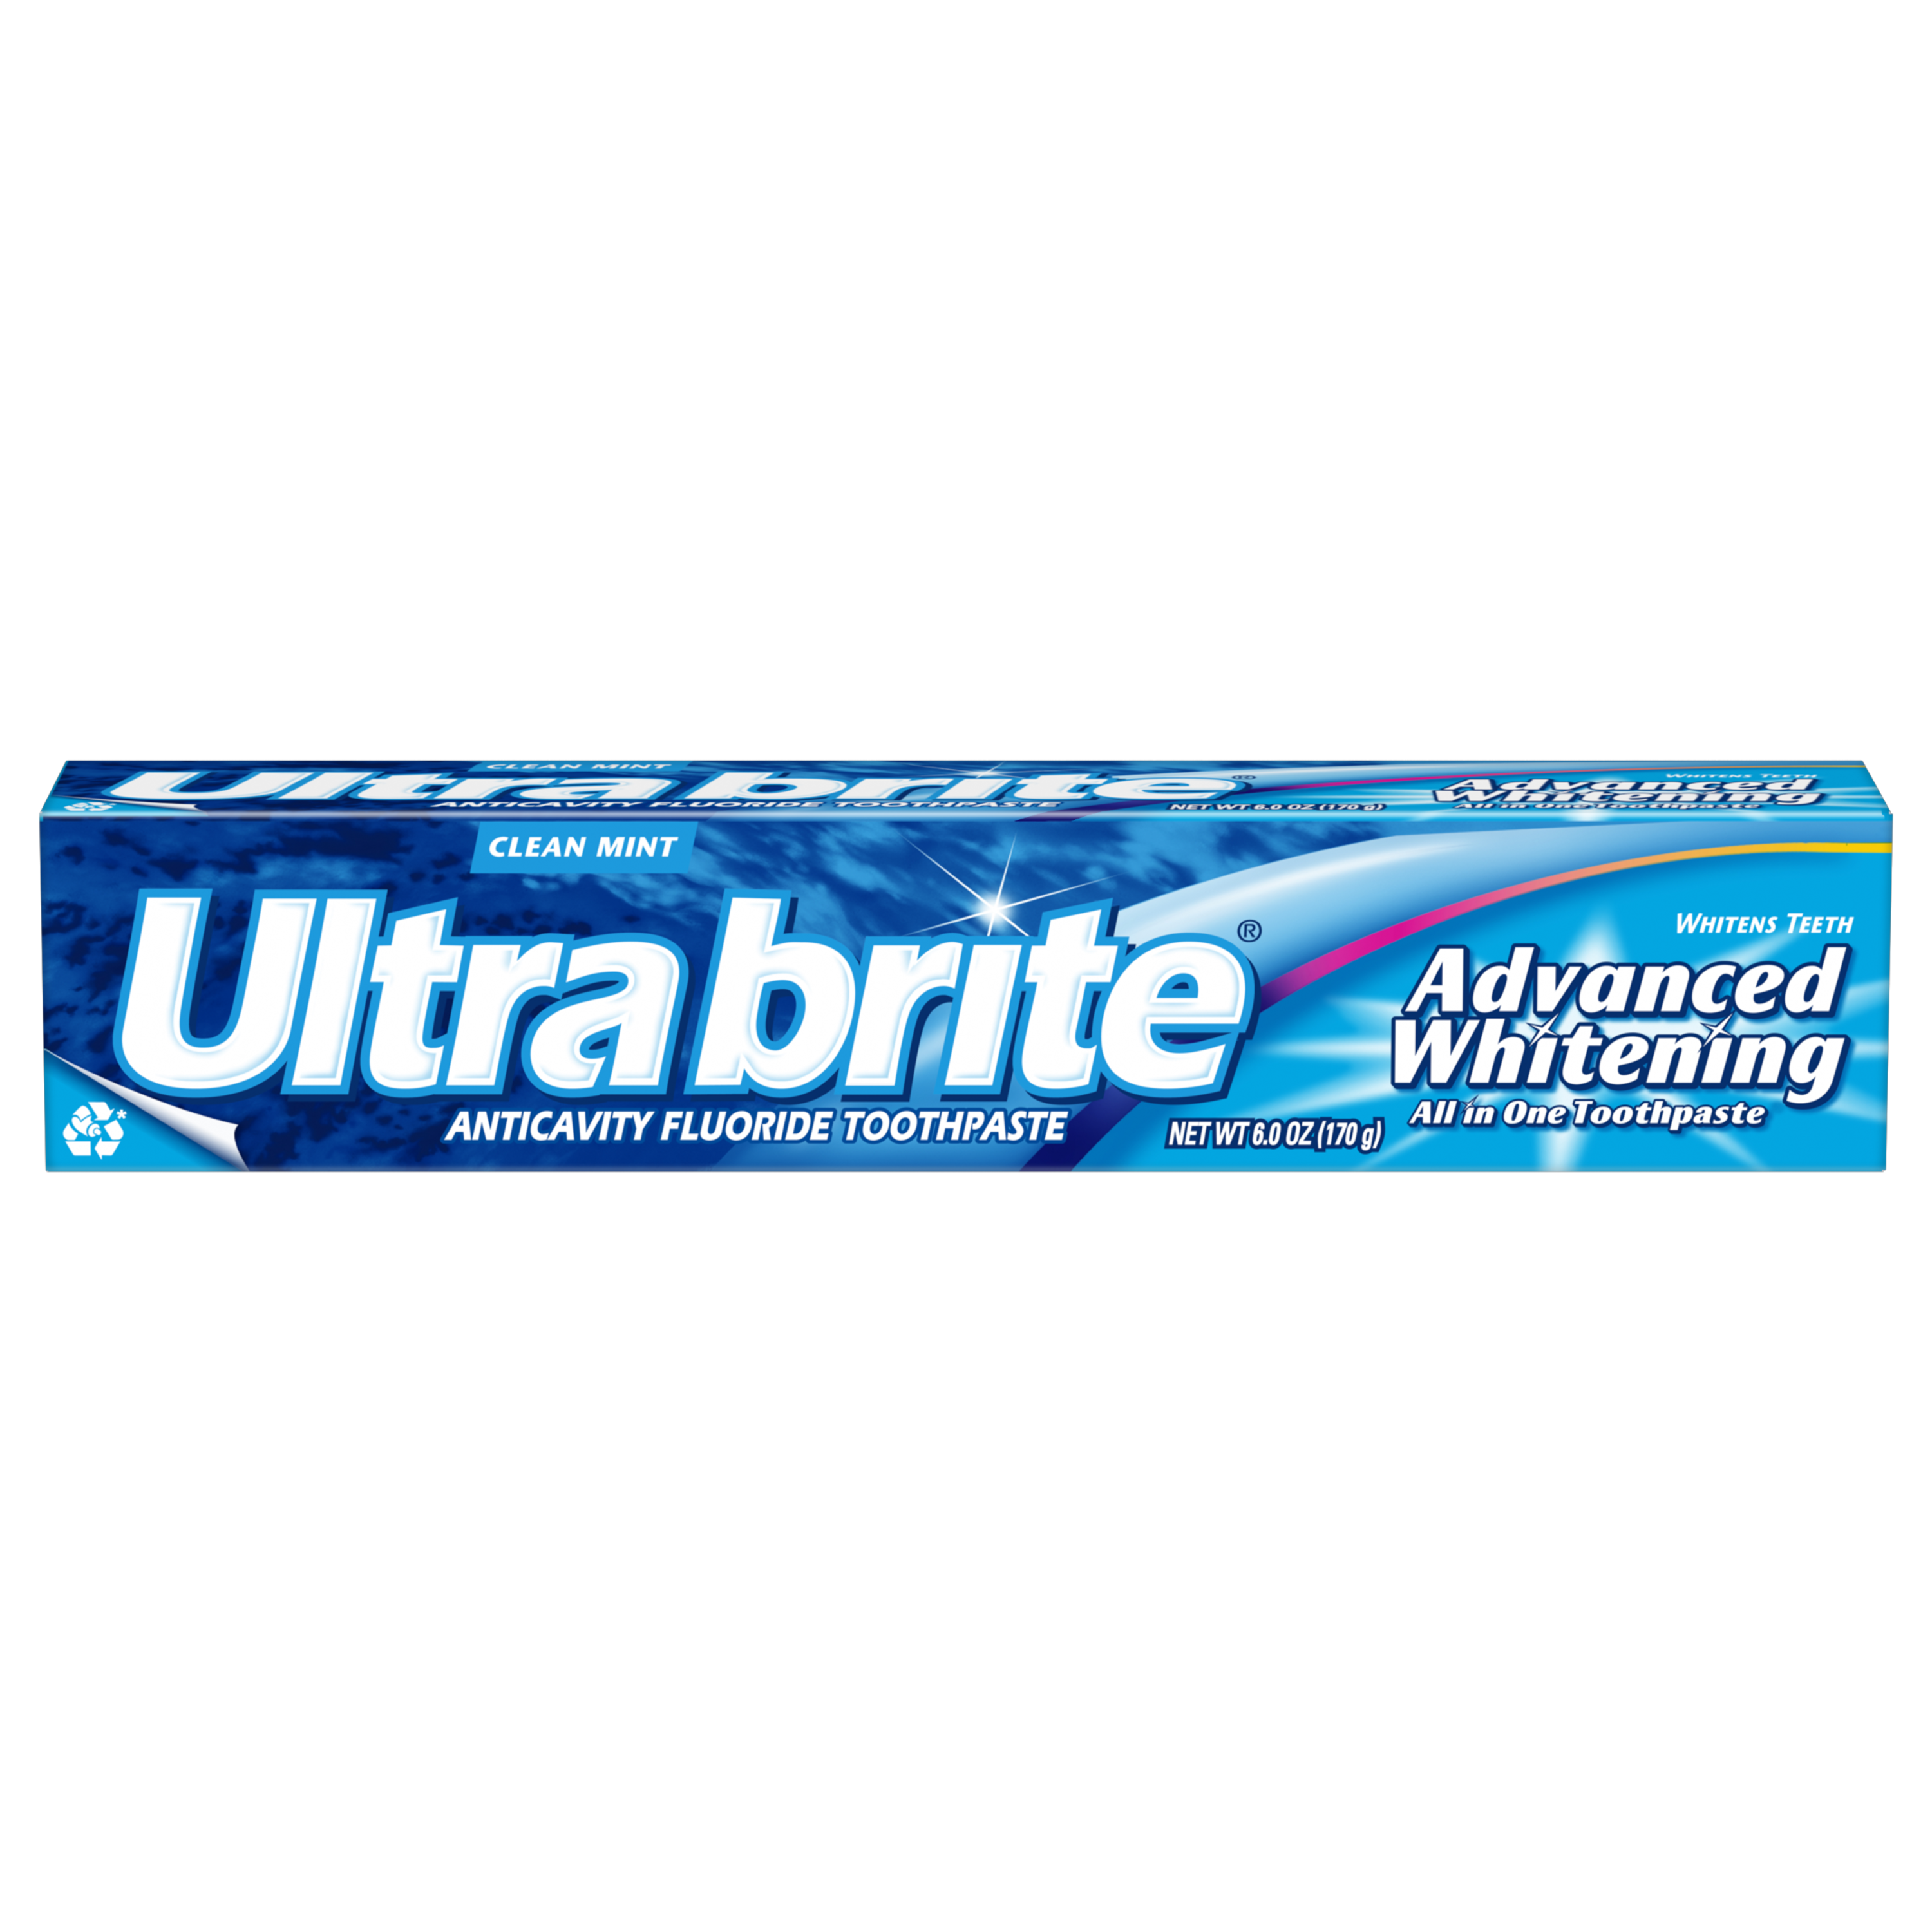 Ultra Brite Advanced Whitening Toothpaste, Clean Mint - 6.0 Ounce - image 1 of 4